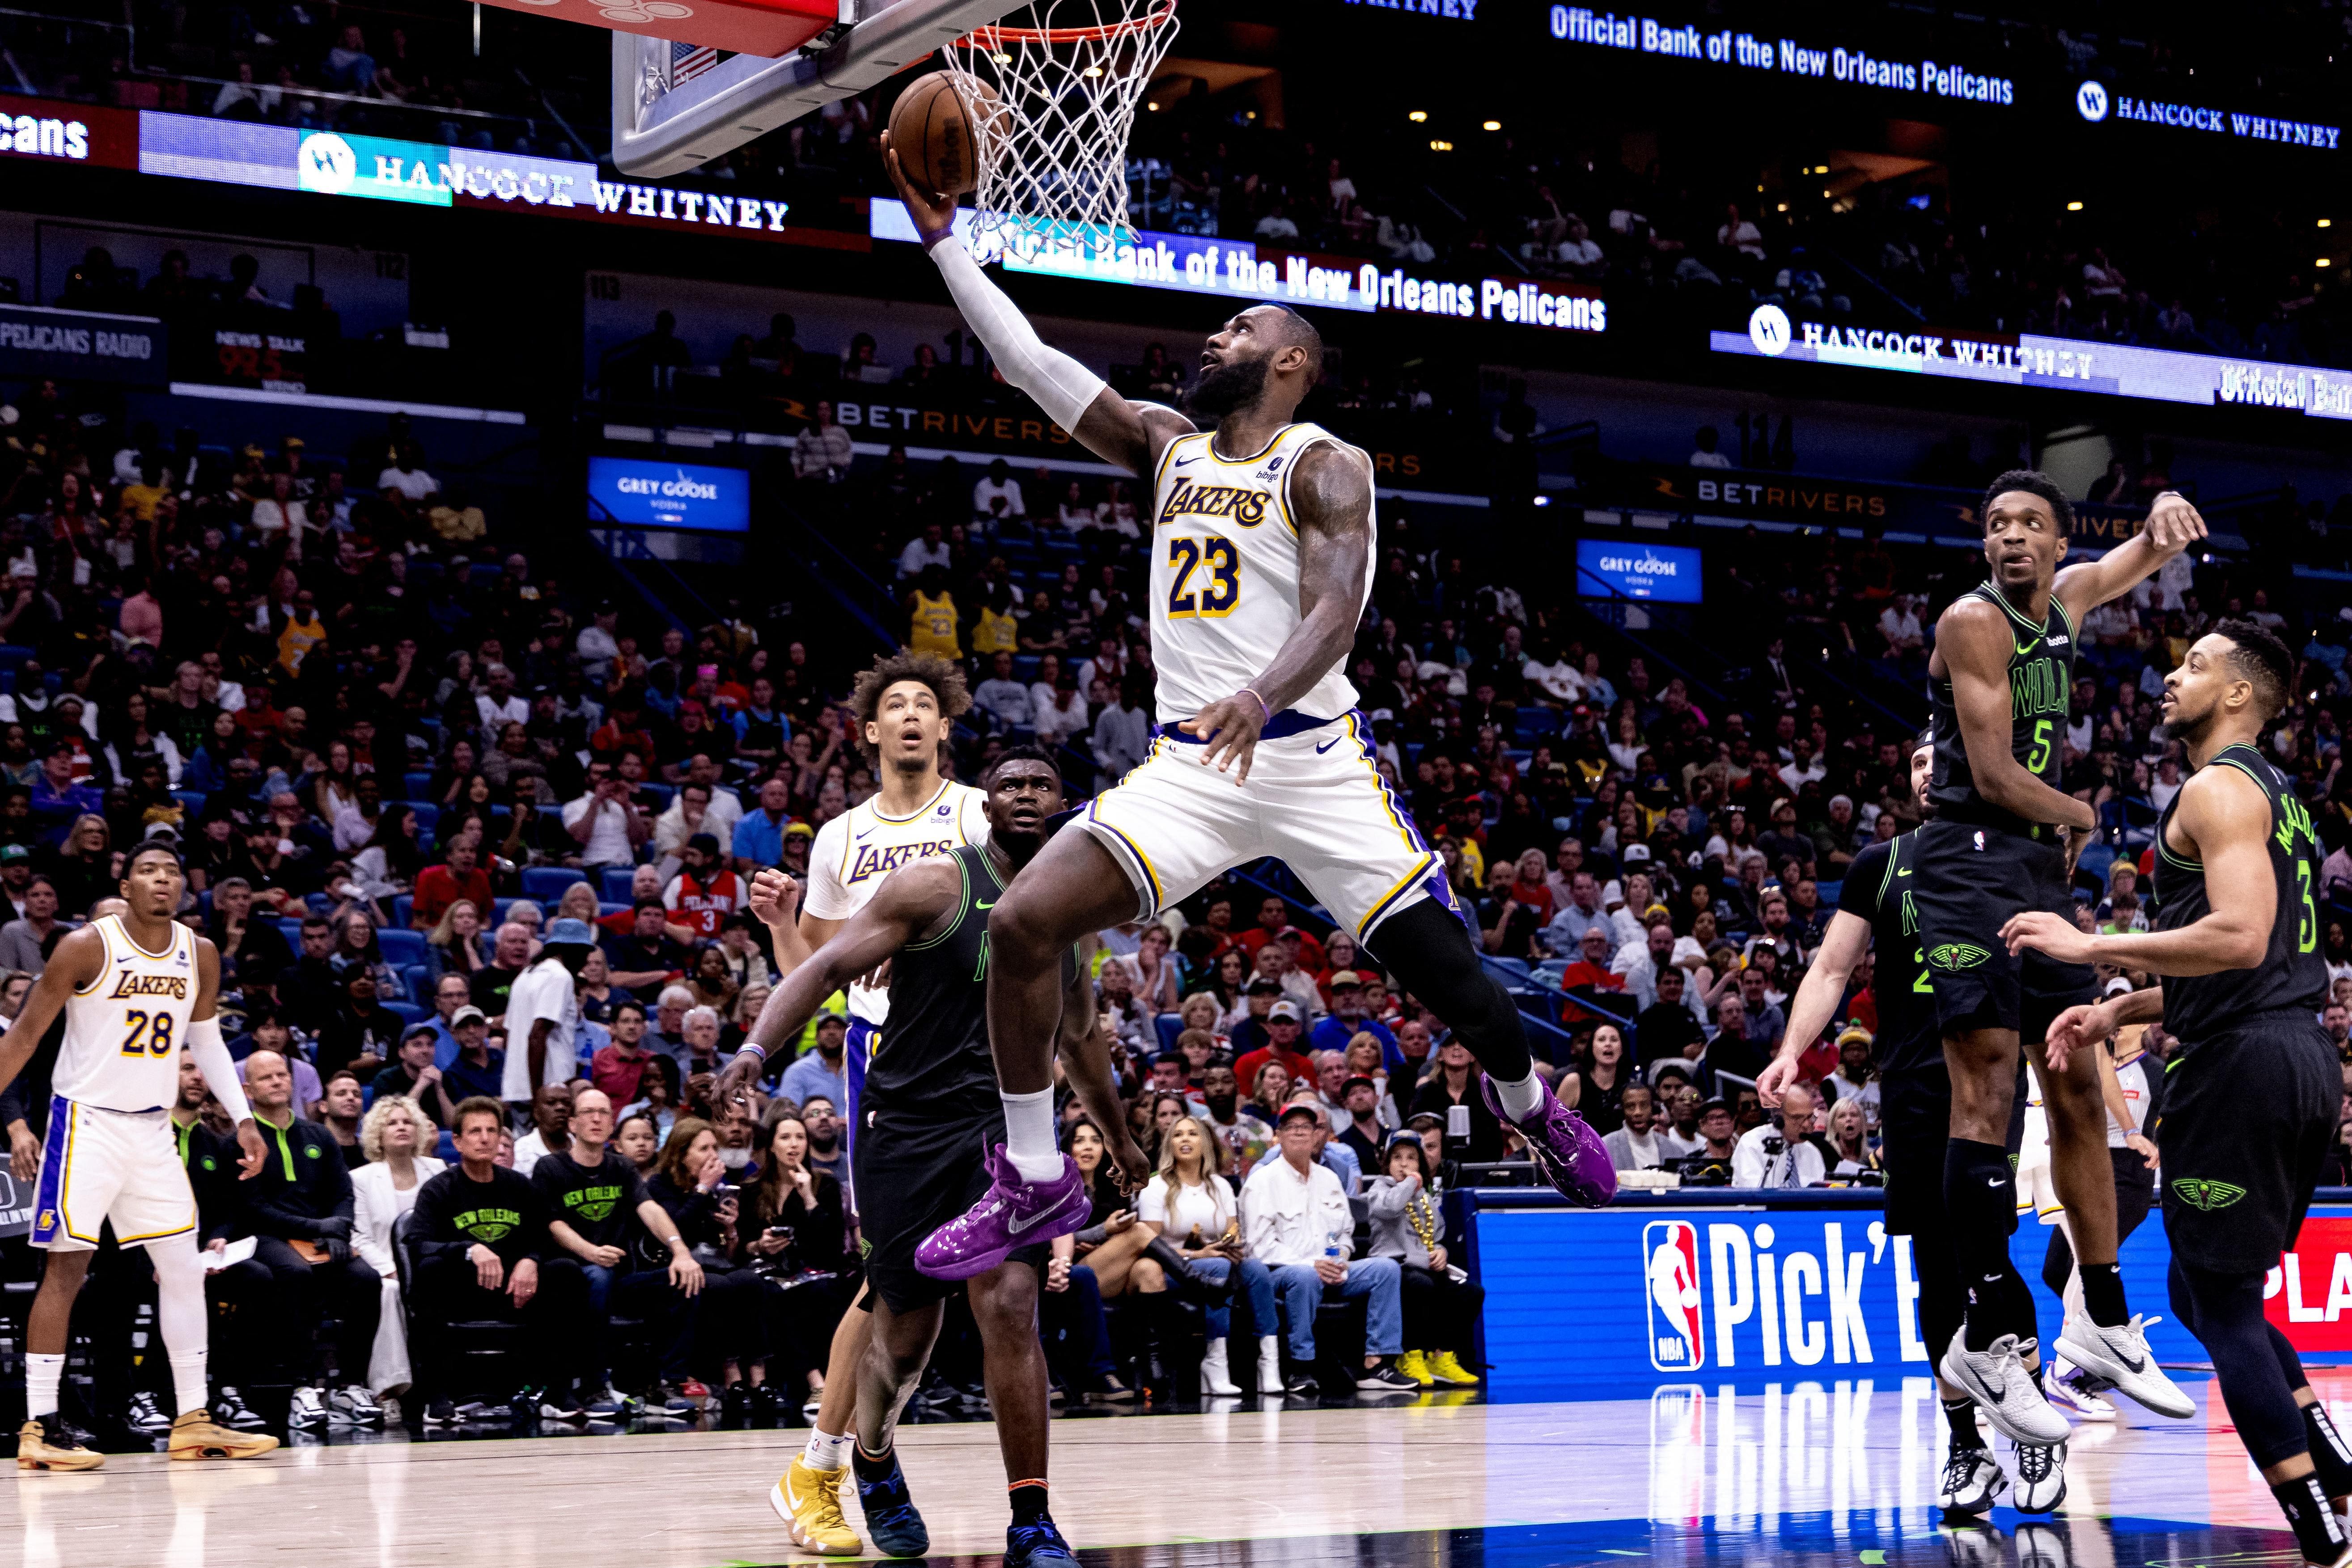 LeBron James’ LA Lakers take on New Orleans Pelicans as NBA play-in tips off